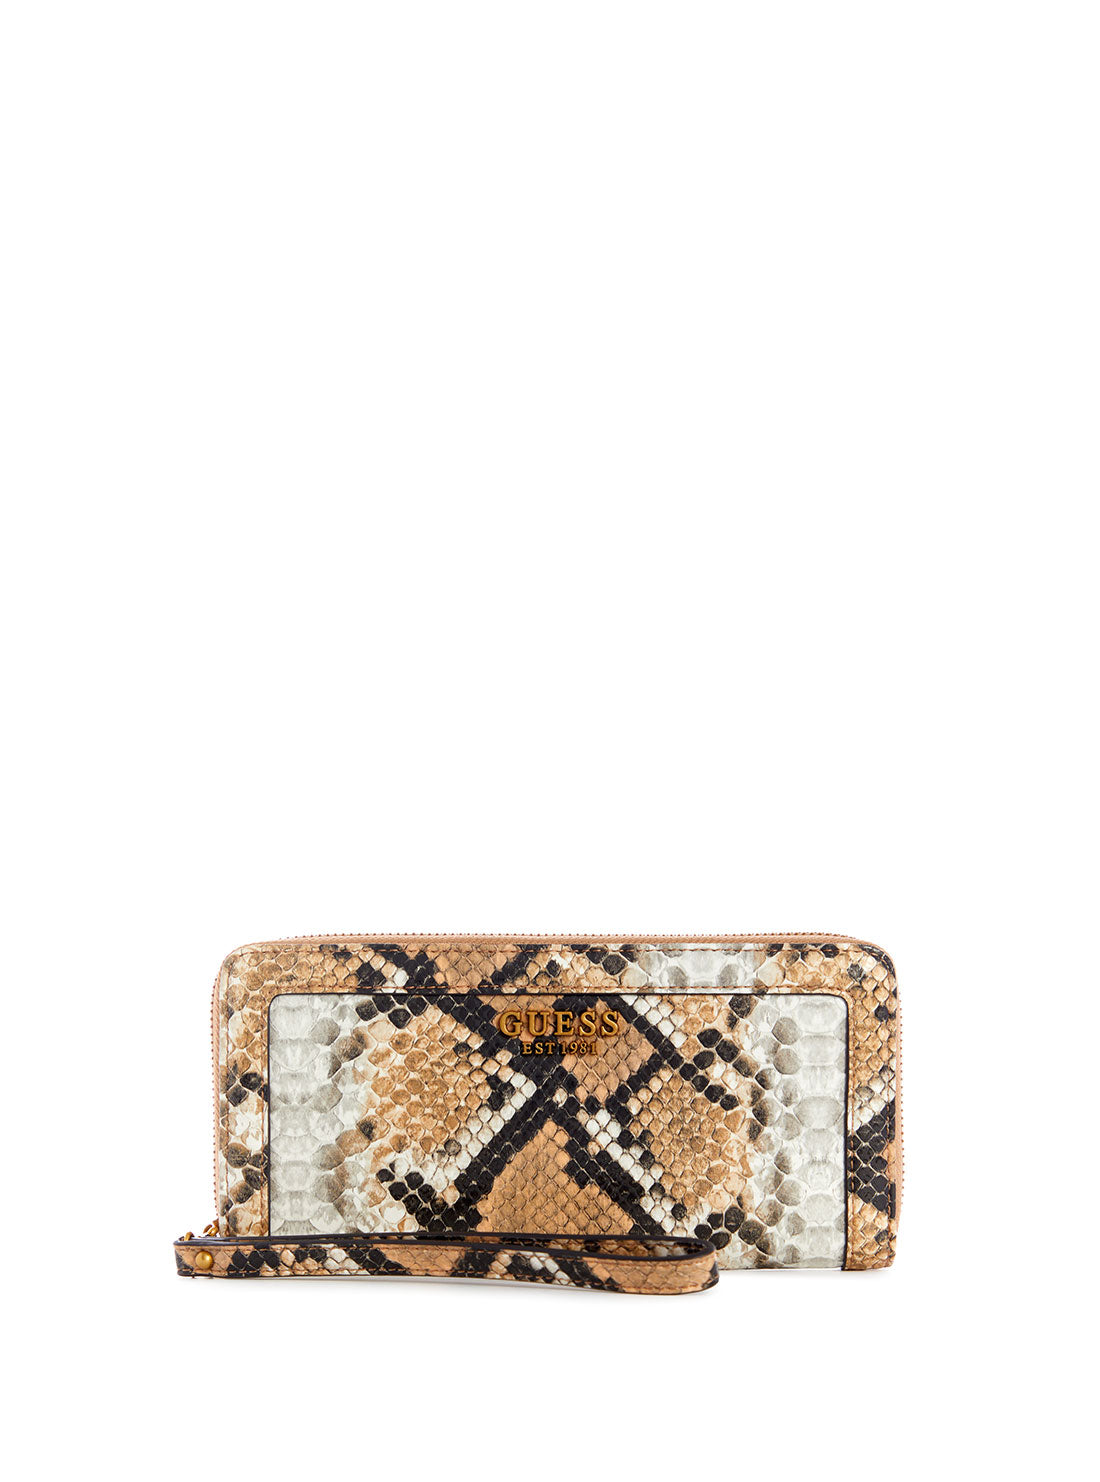 GUESS Womens Natural Python Abey Large Zip Wallet Inside View